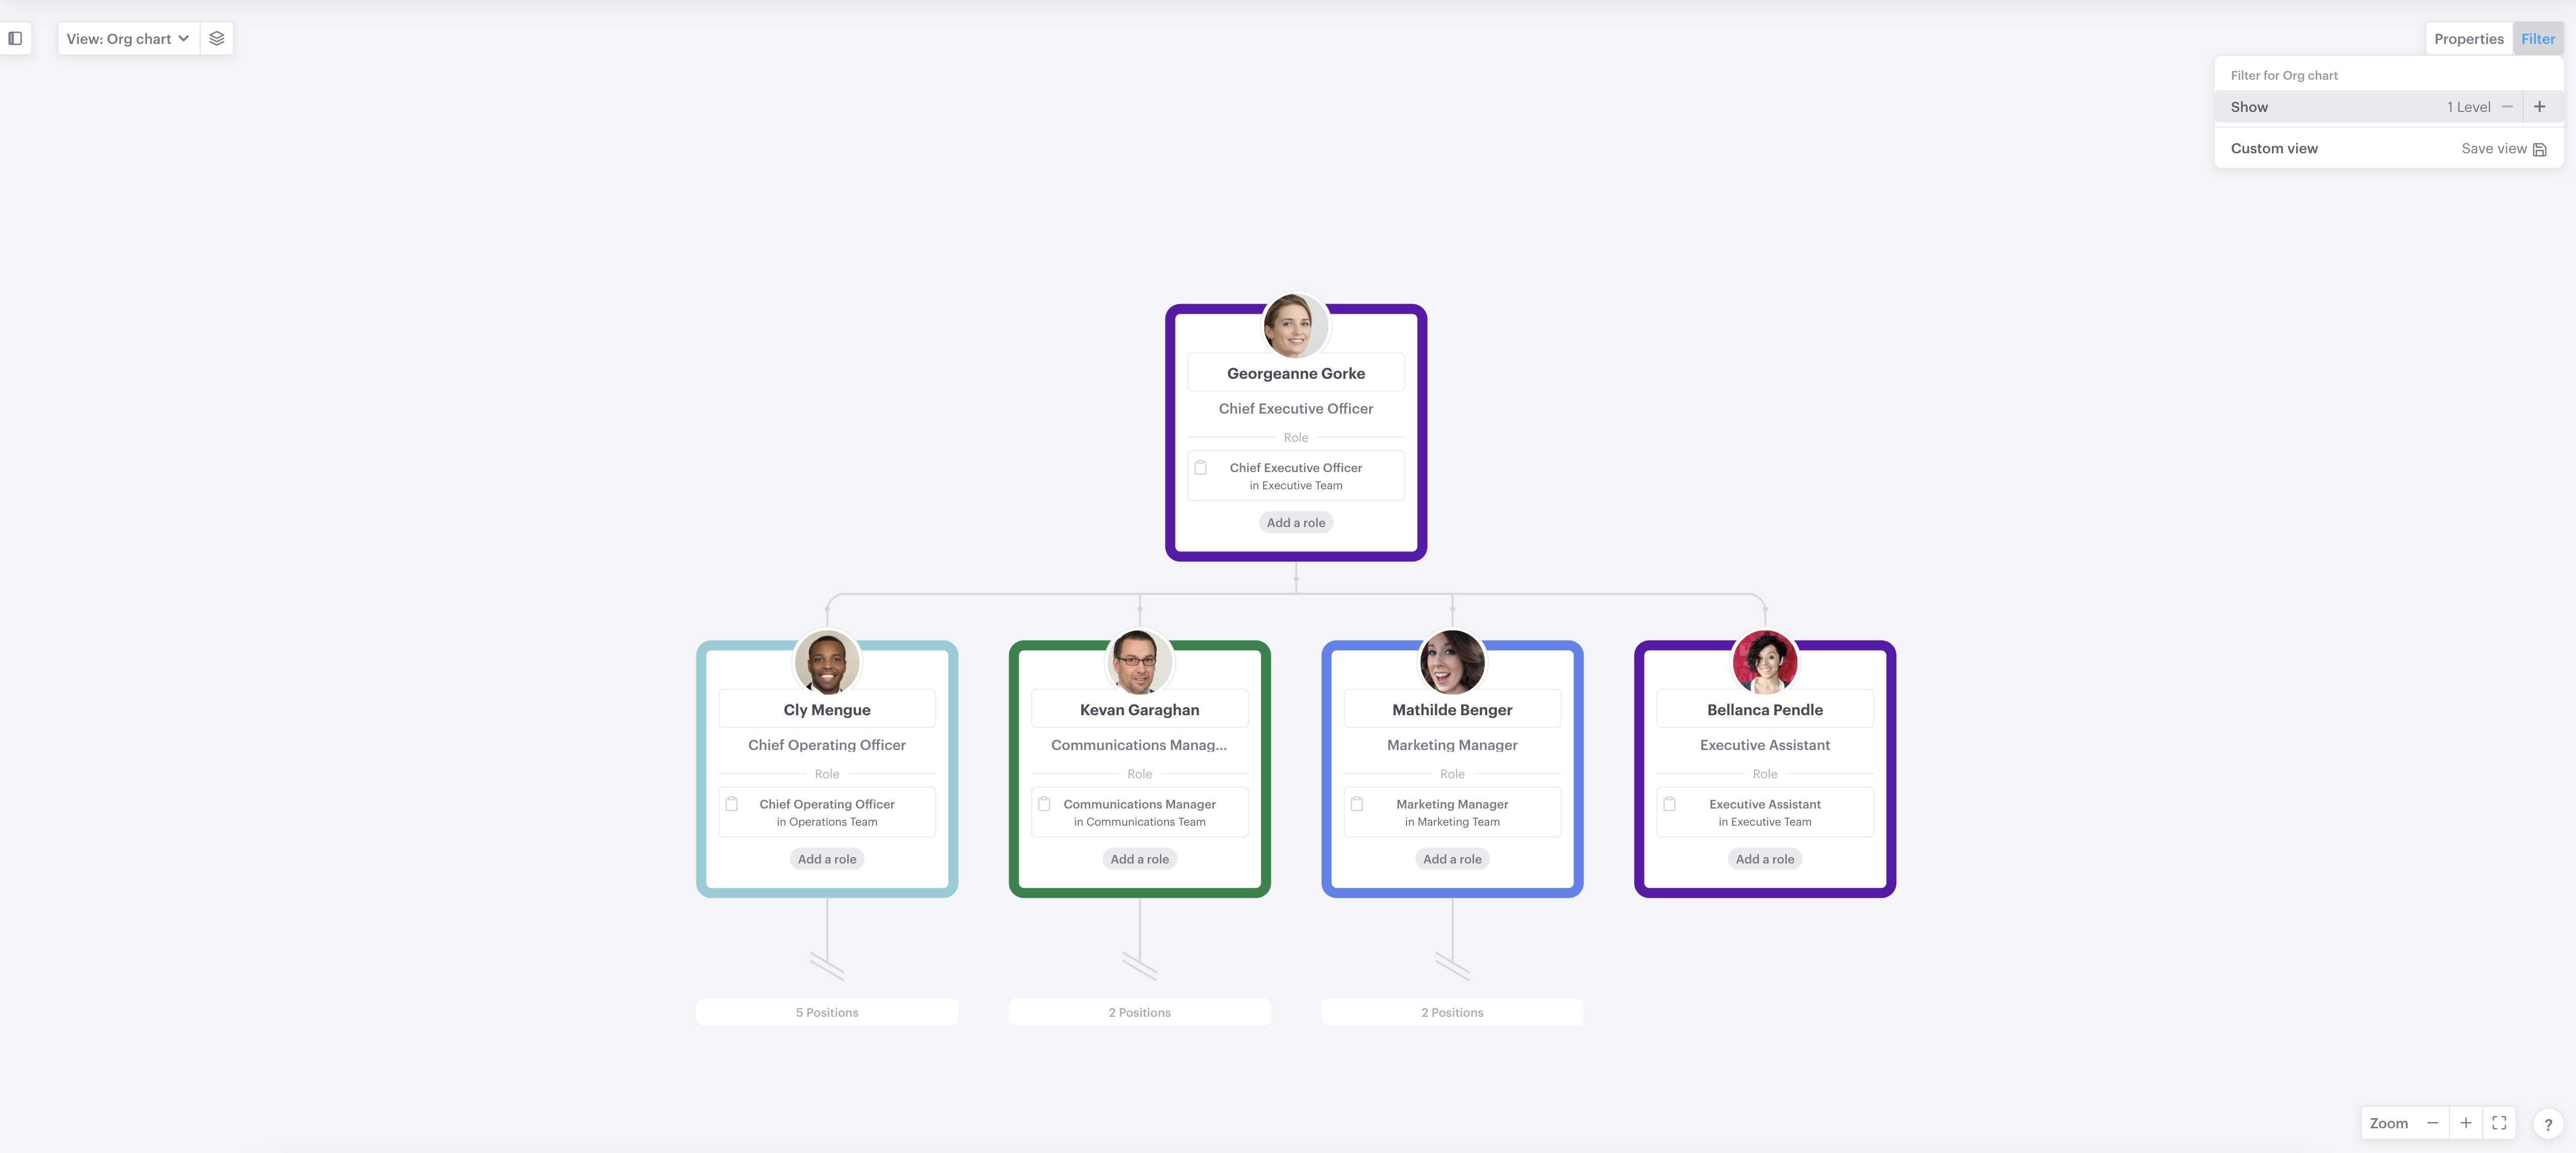 Export a whole org chart